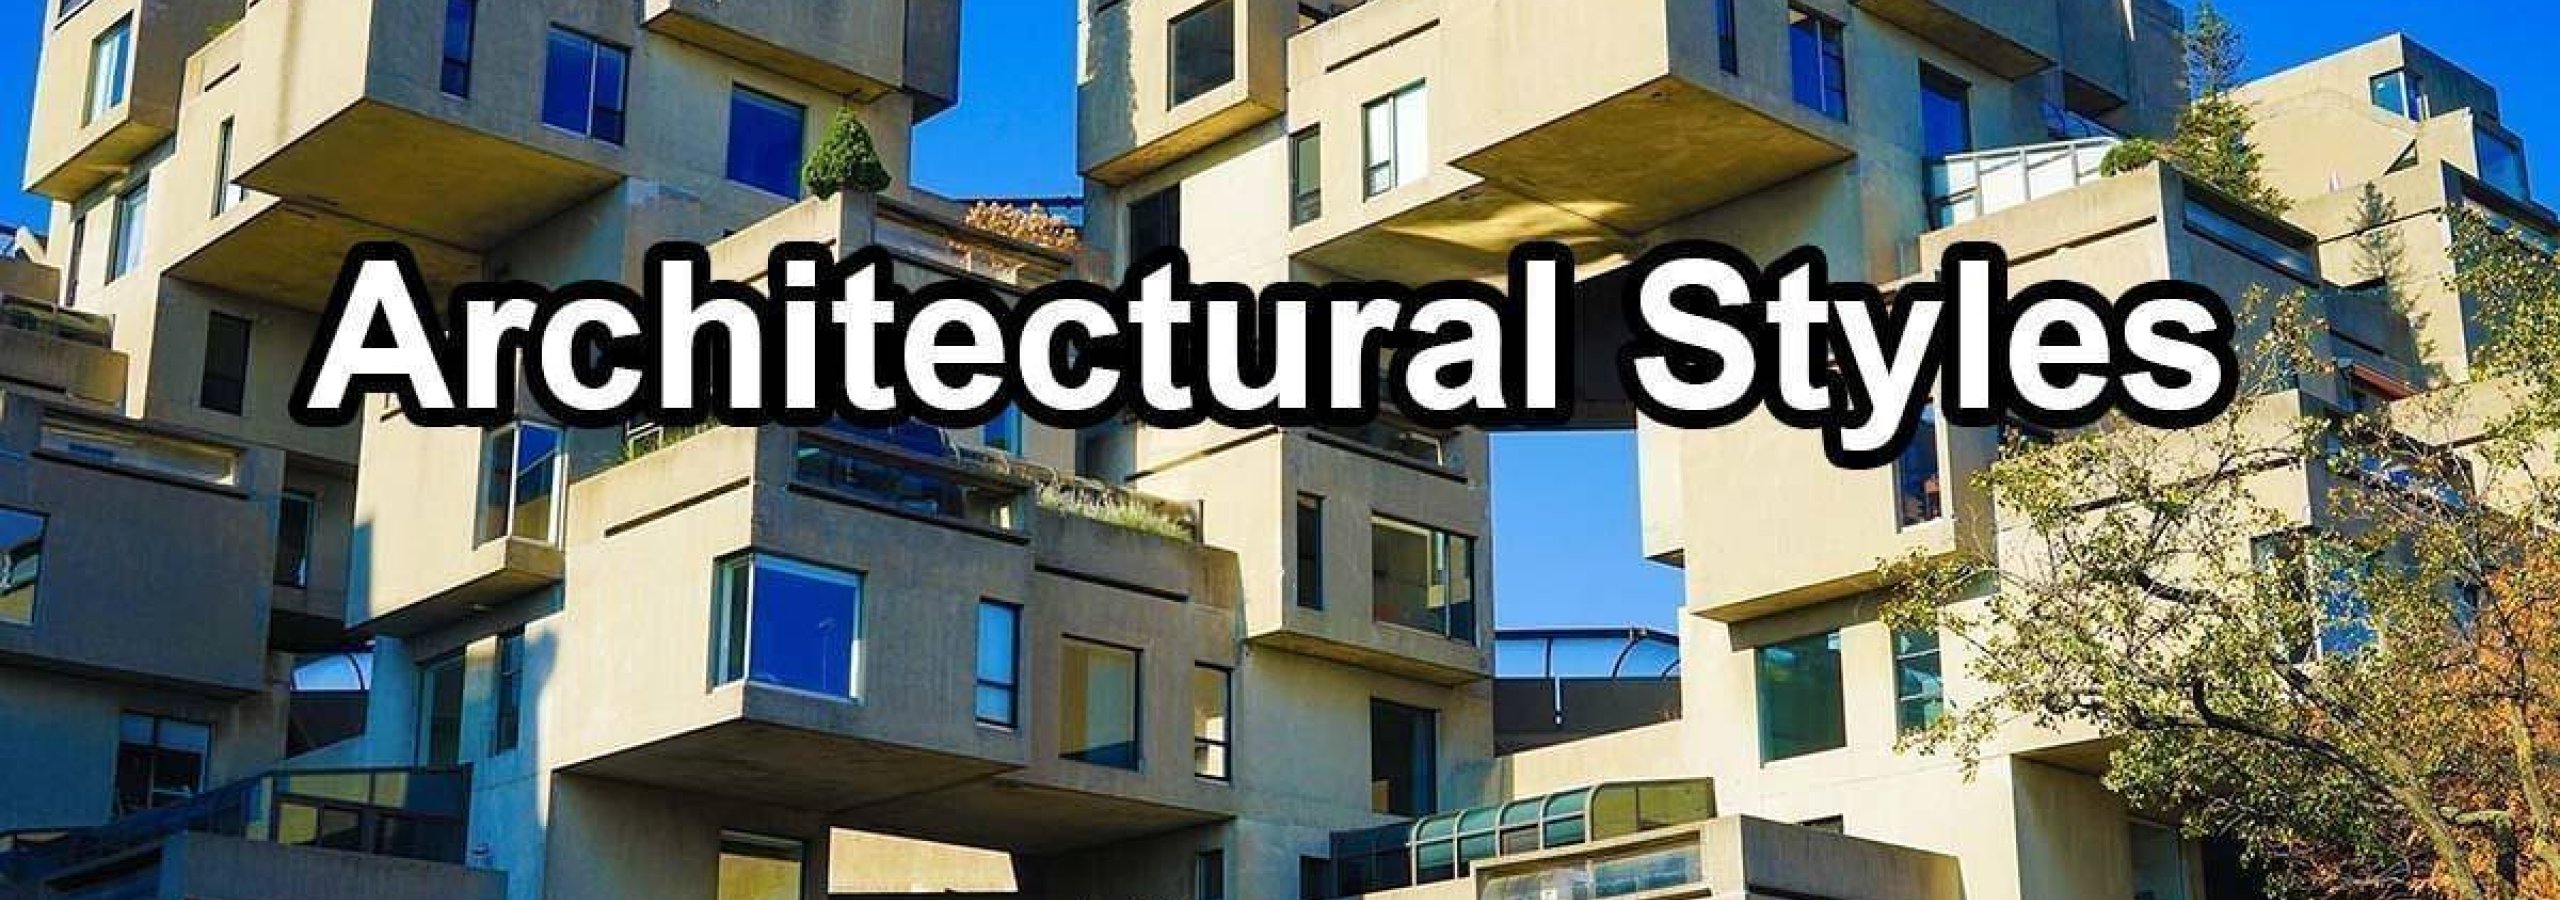 architectural-styles